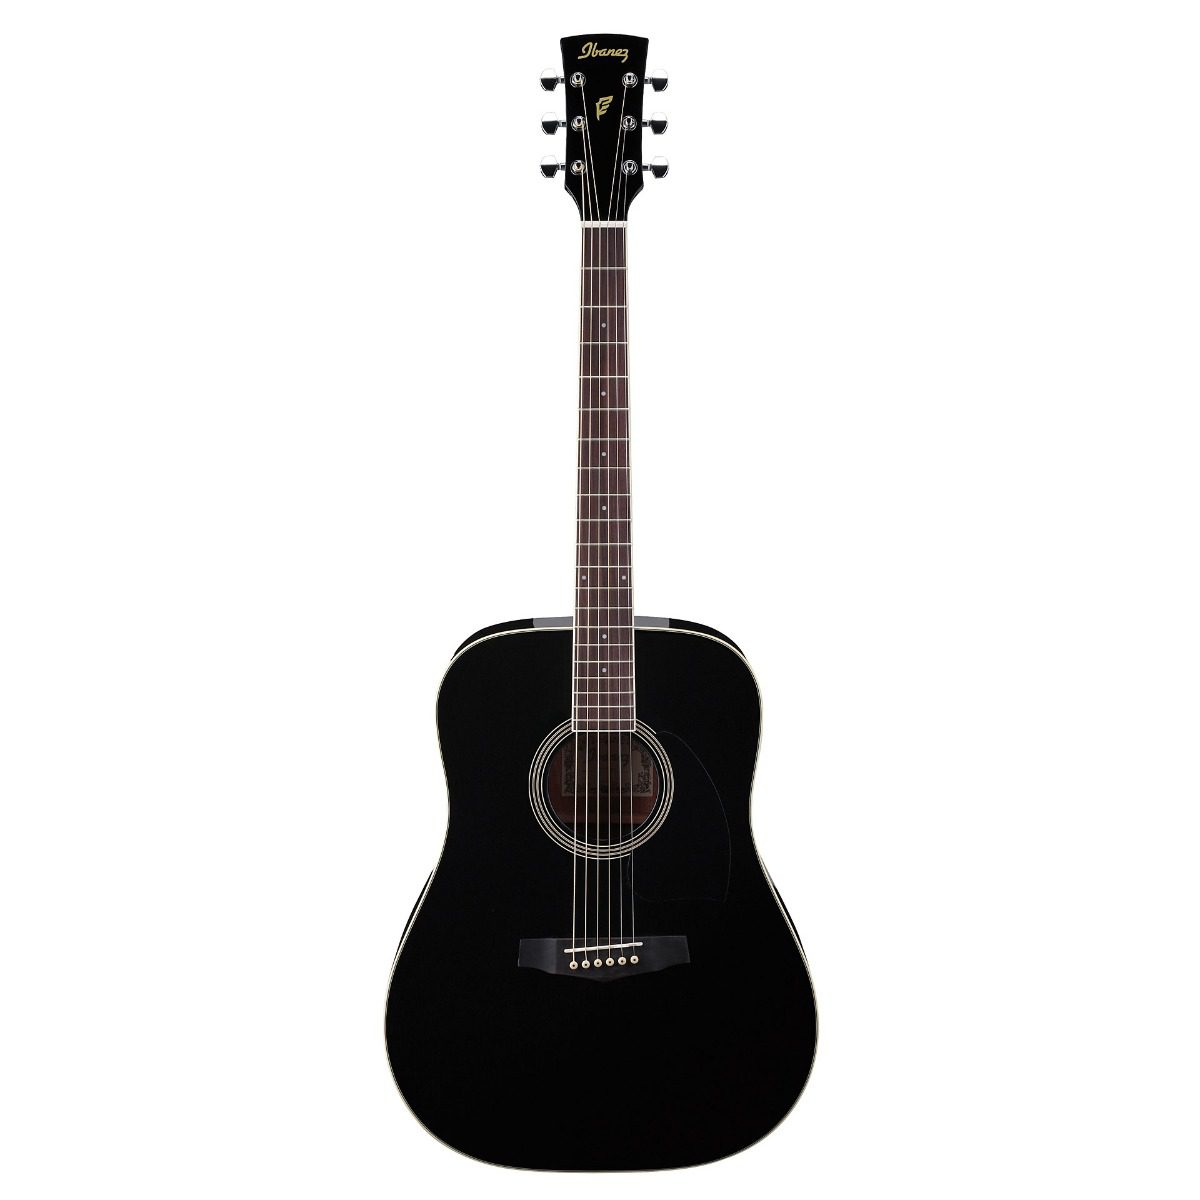 Ibanez PF15-BK Dreadnought Acoustic Guitar Black High Gloss Finish | Musical Instruments | Musical Instruments, Musical Instruments. Musical Instruments: Acoustic Guitars, Musical Instruments. Musical Instruments: Guitars | Ibanez